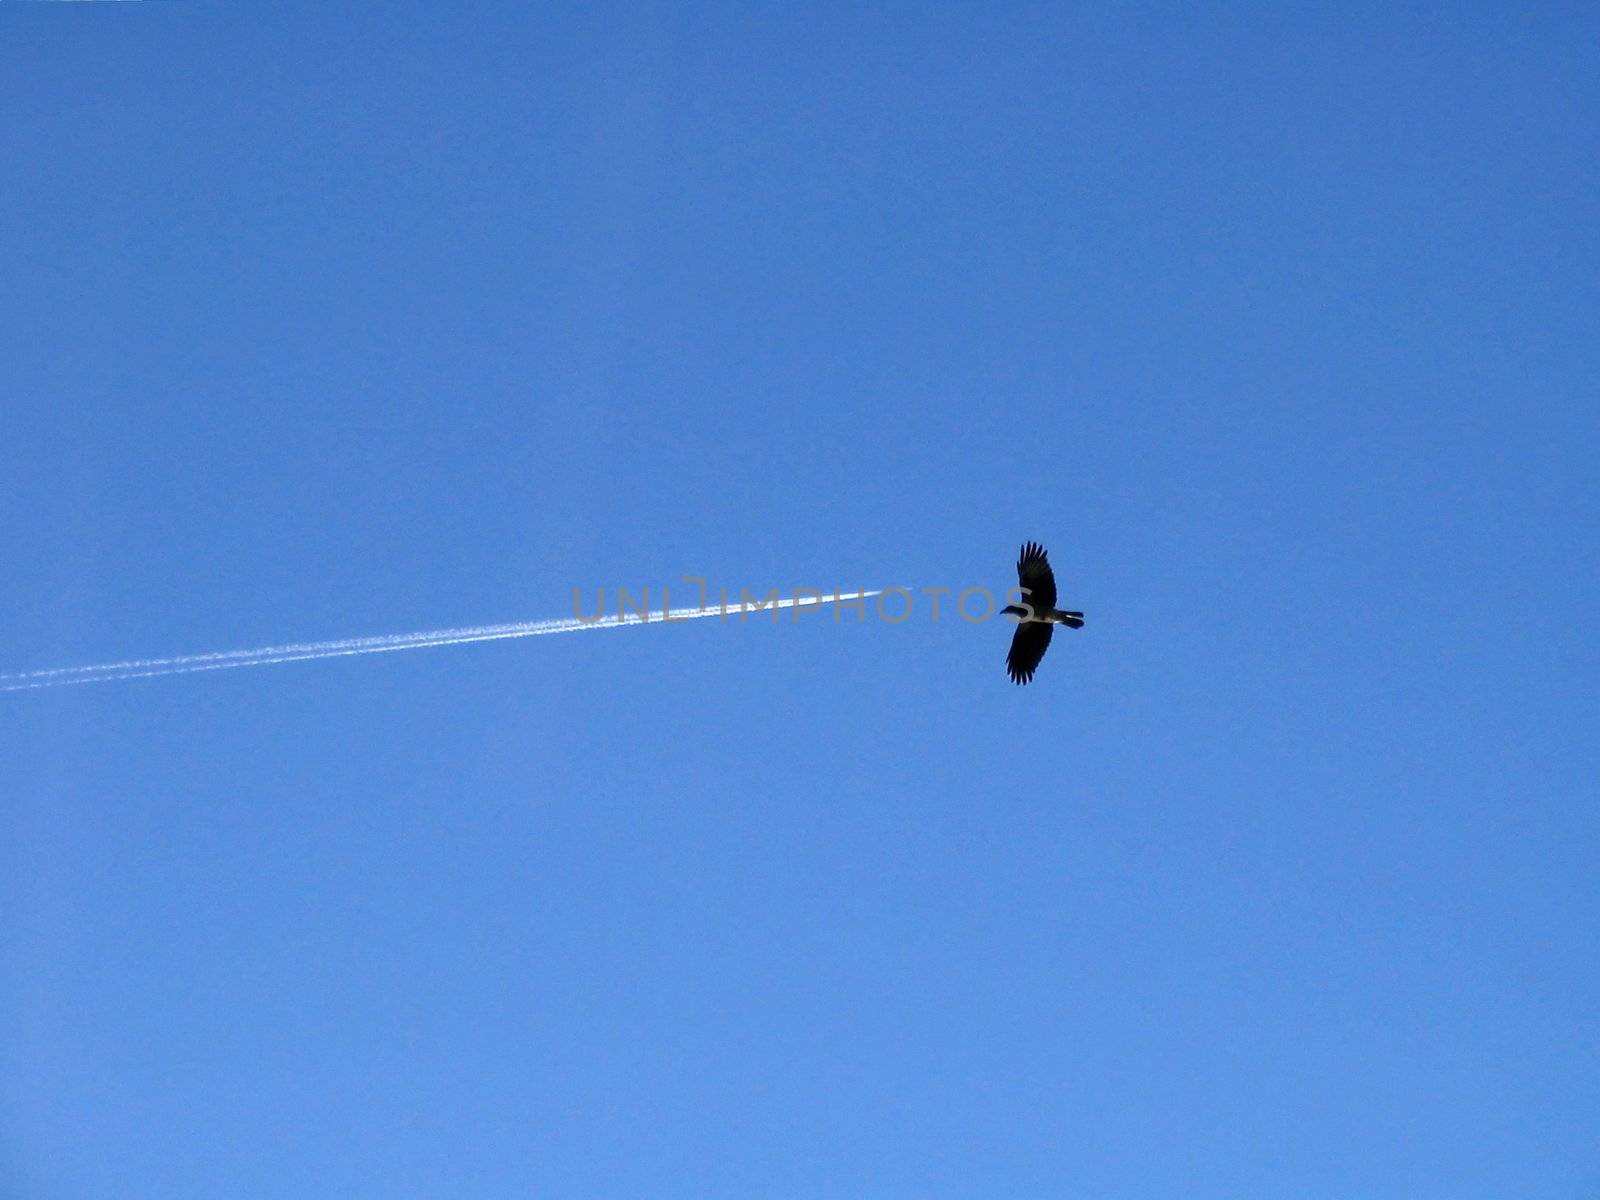 Crow and plane in sky